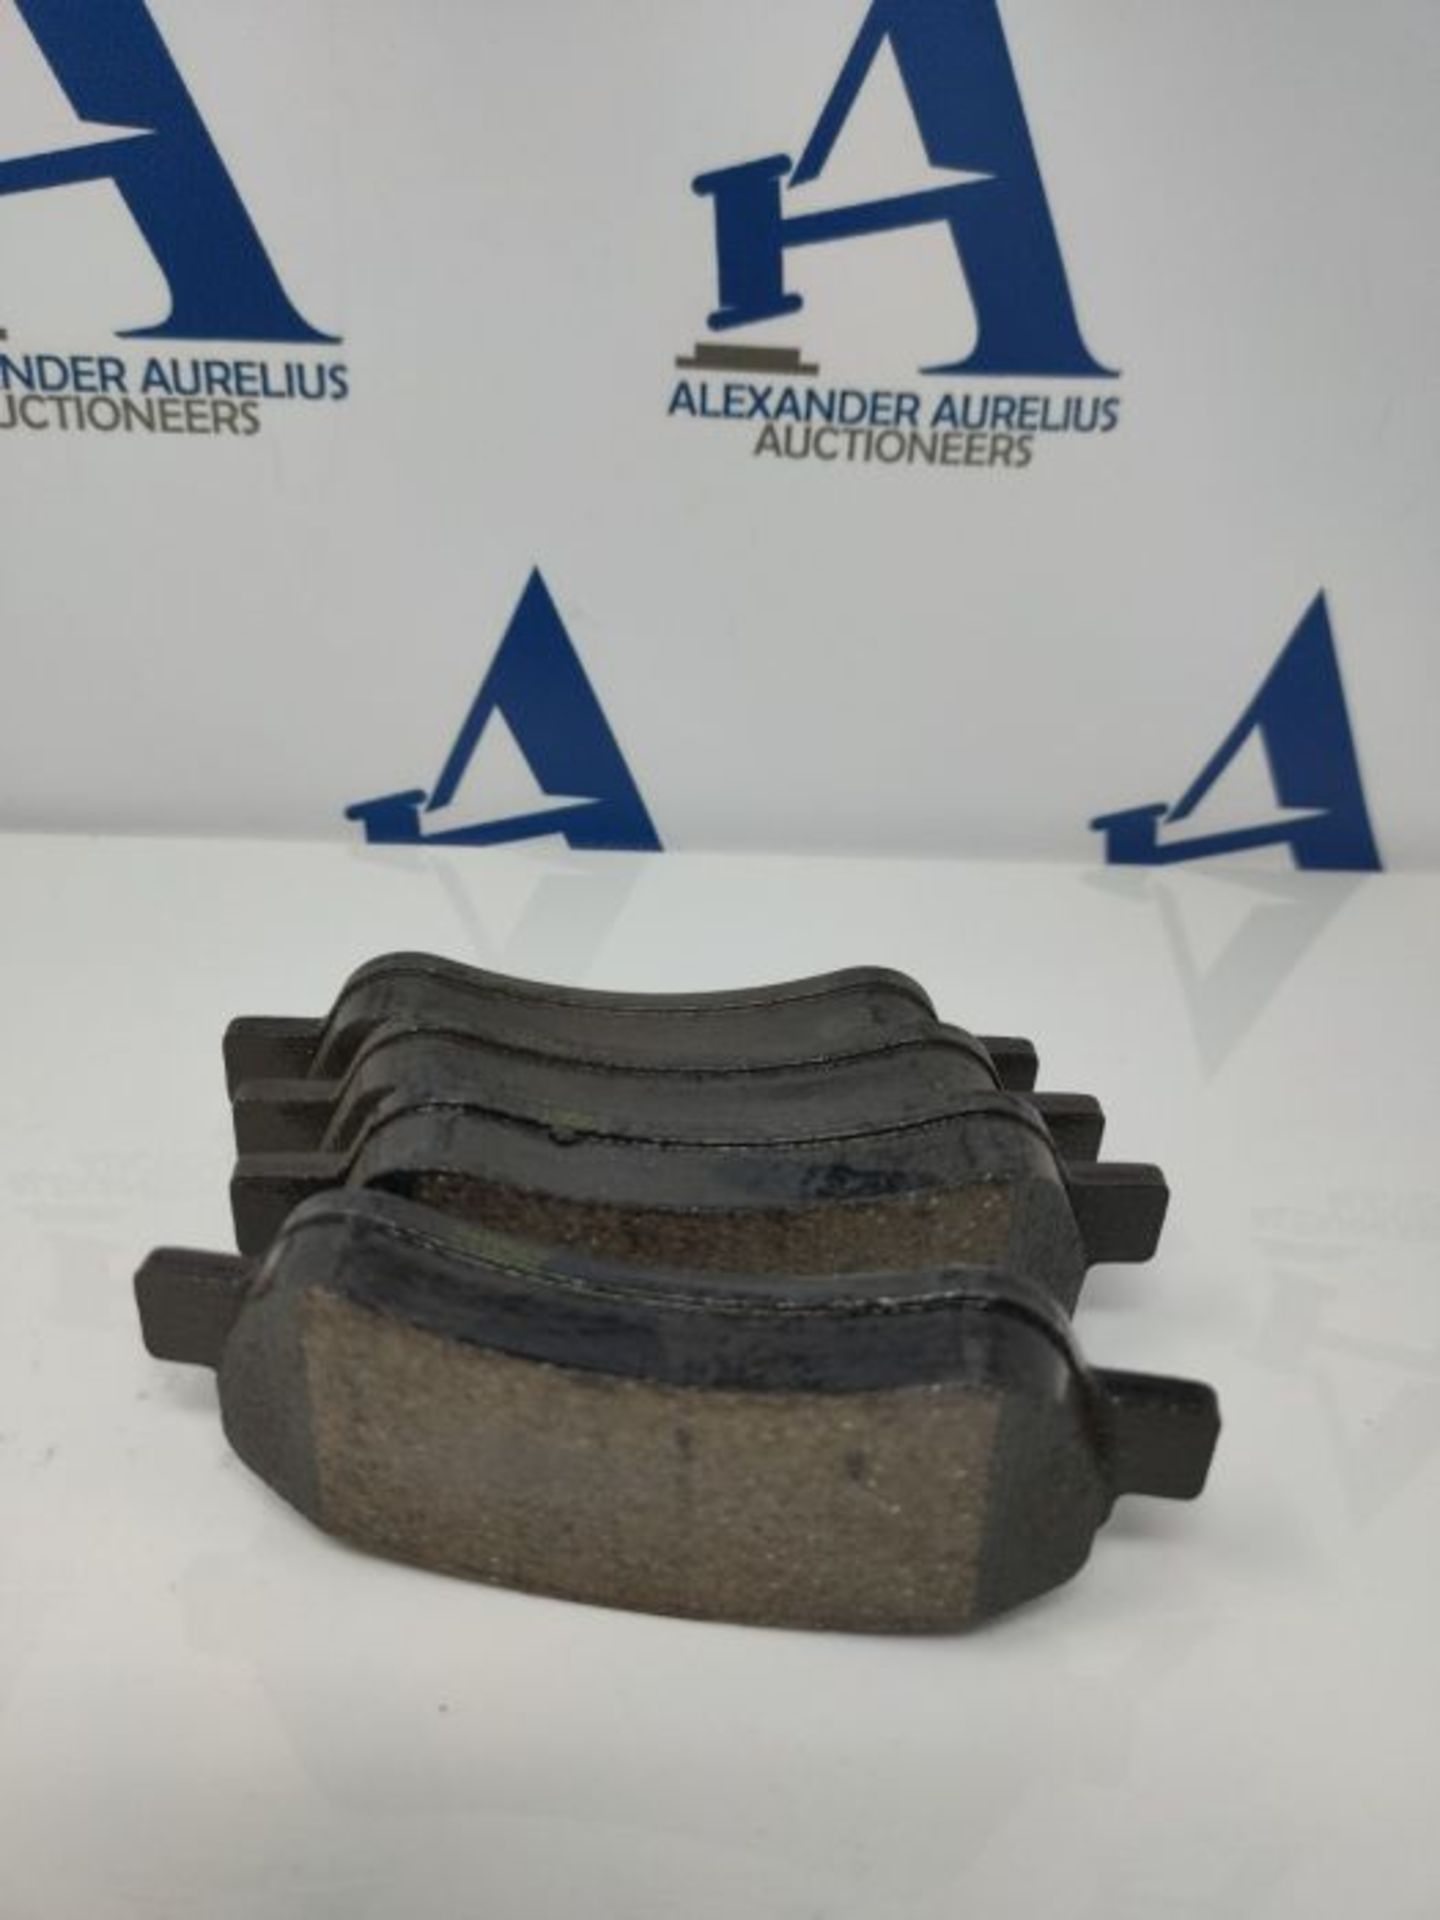 metelligroup 22-0710-0 Brake Pads, Made in Italy, Spare Parts for Cars, ECE R90 Certif - Image 3 of 3